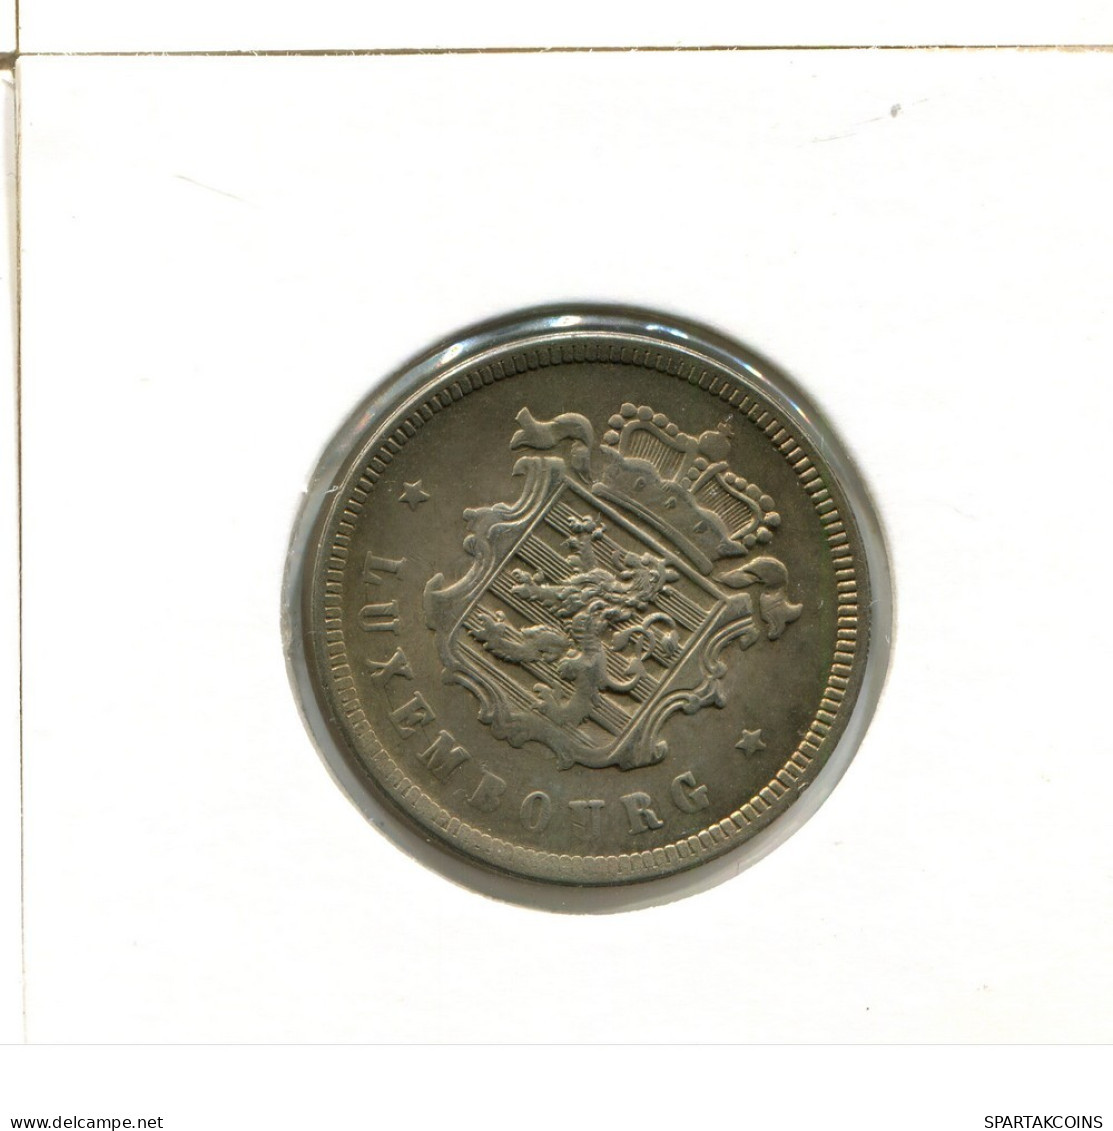 25 CENTIMES 1938 LUXEMBURGO LUXEMBOURG Moneda #AT190.E.A - Luxembourg